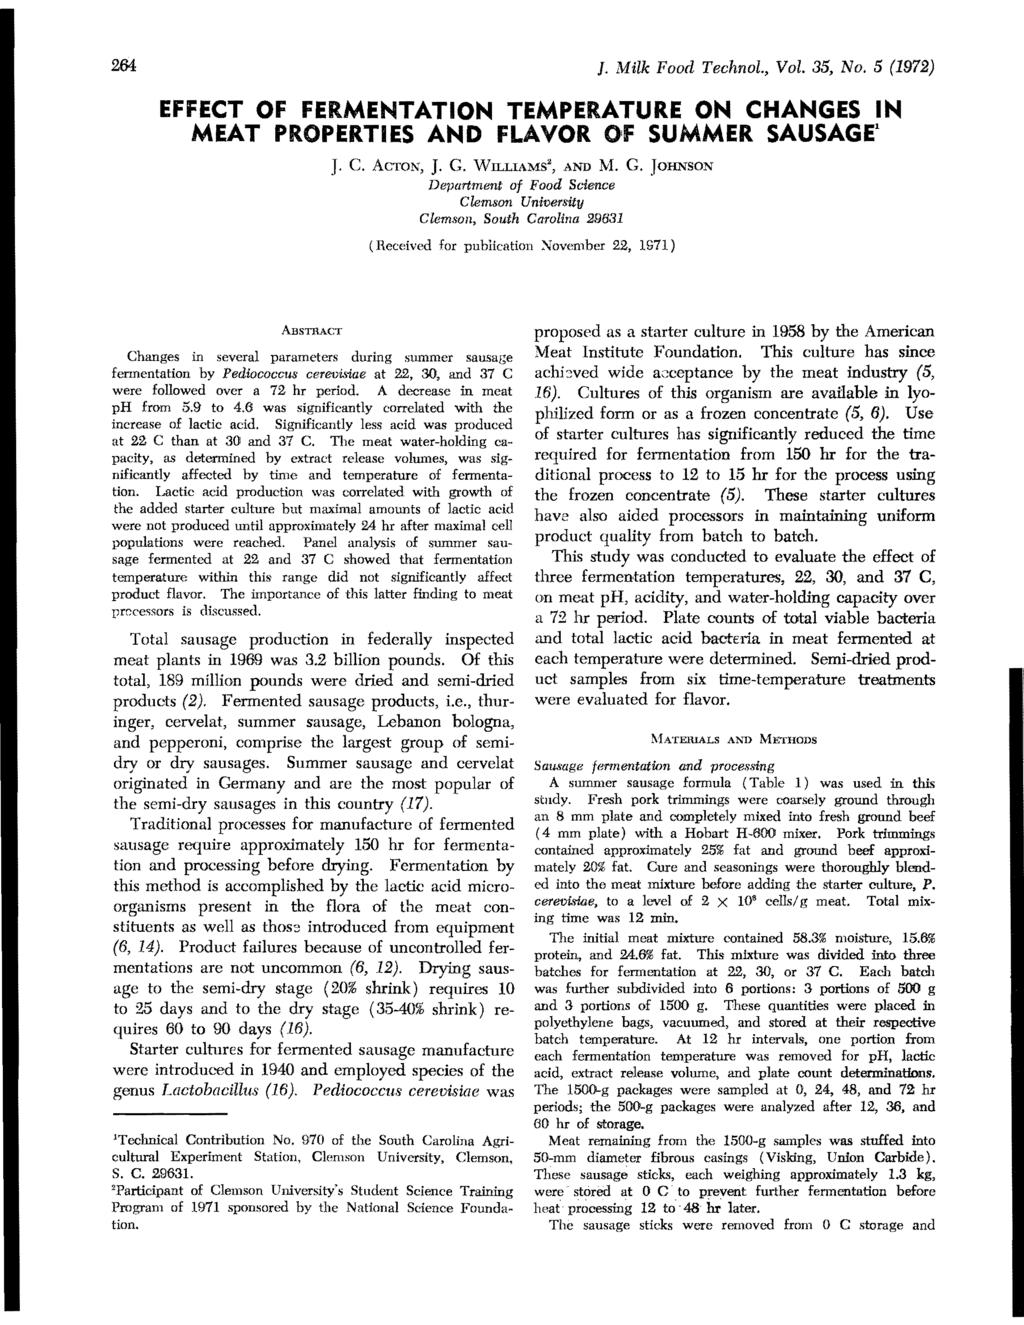 264 ]. Milk Food Technol., Vol. 35, No. 5 (1972) EFFECT OF FERMENTATION TEMPERATURE ON CHANGES IN MEAT PROPERTIES AND FLAVOR OF SUMMER SAUSAGE. J. C. AcroN, J. G.